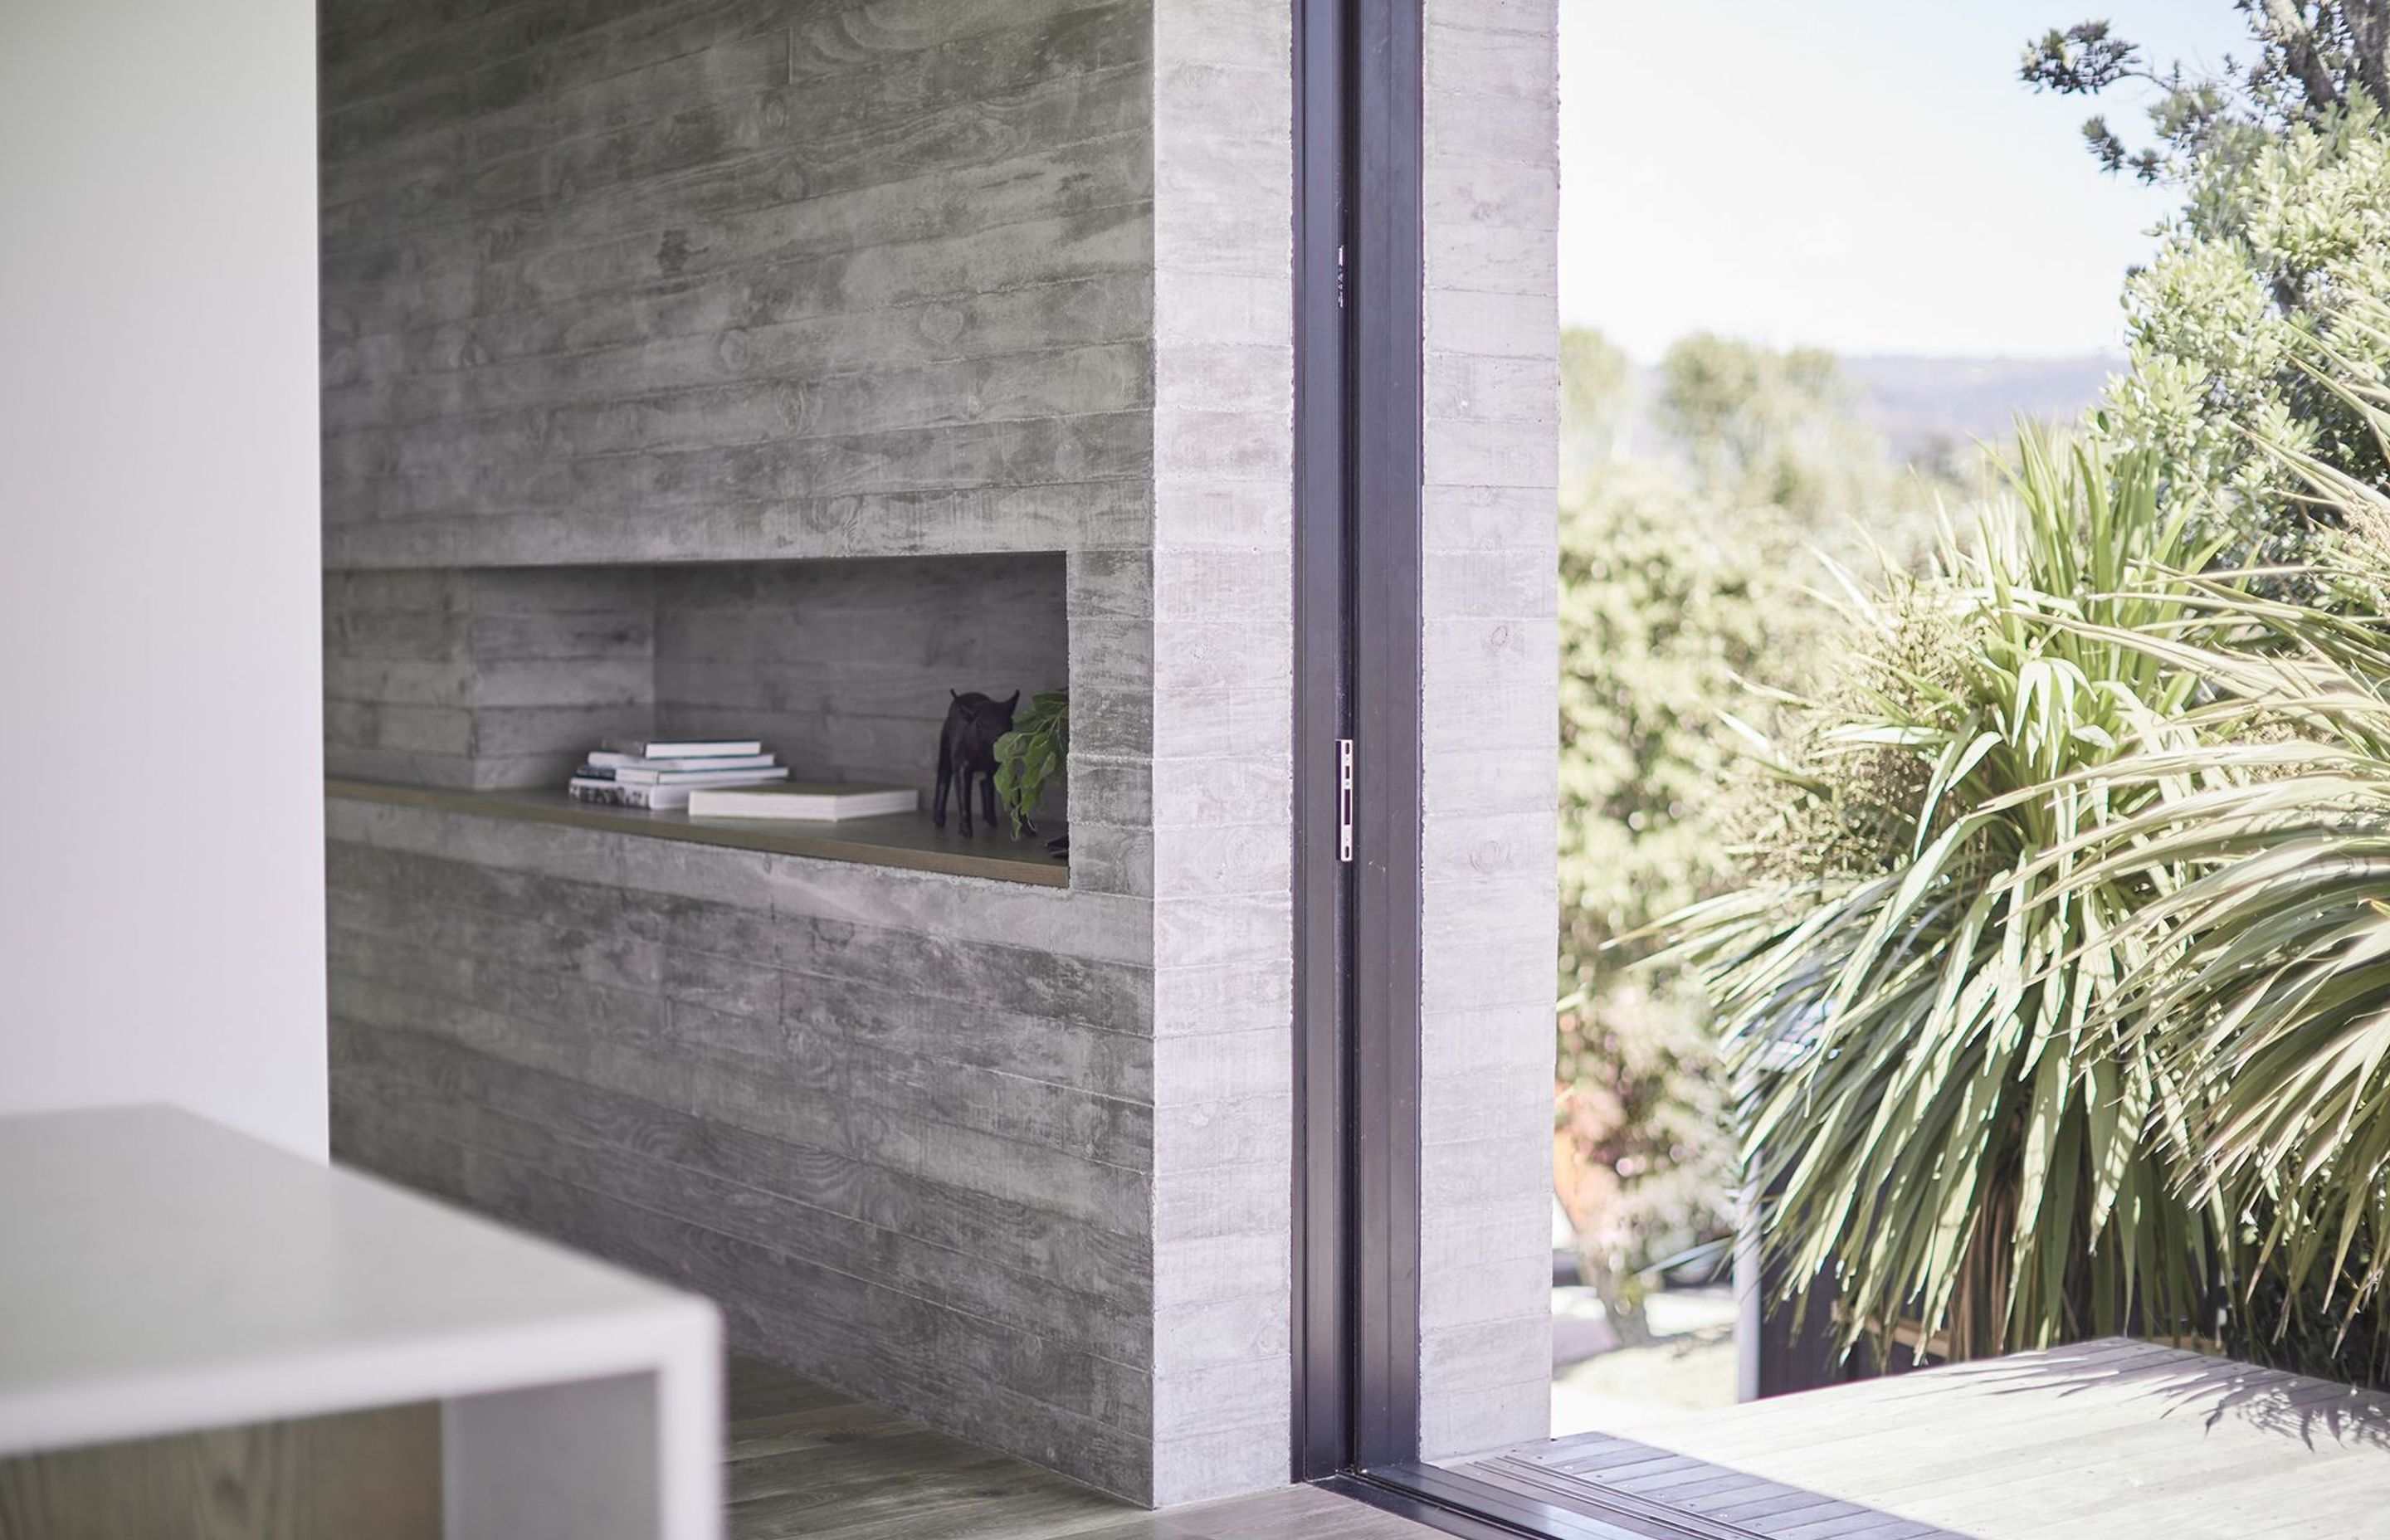 The first of the three interior in situ concrete features is on the western elevation and doubles as both a structural wall and a method of completely concealing three doors and two screens when opened.